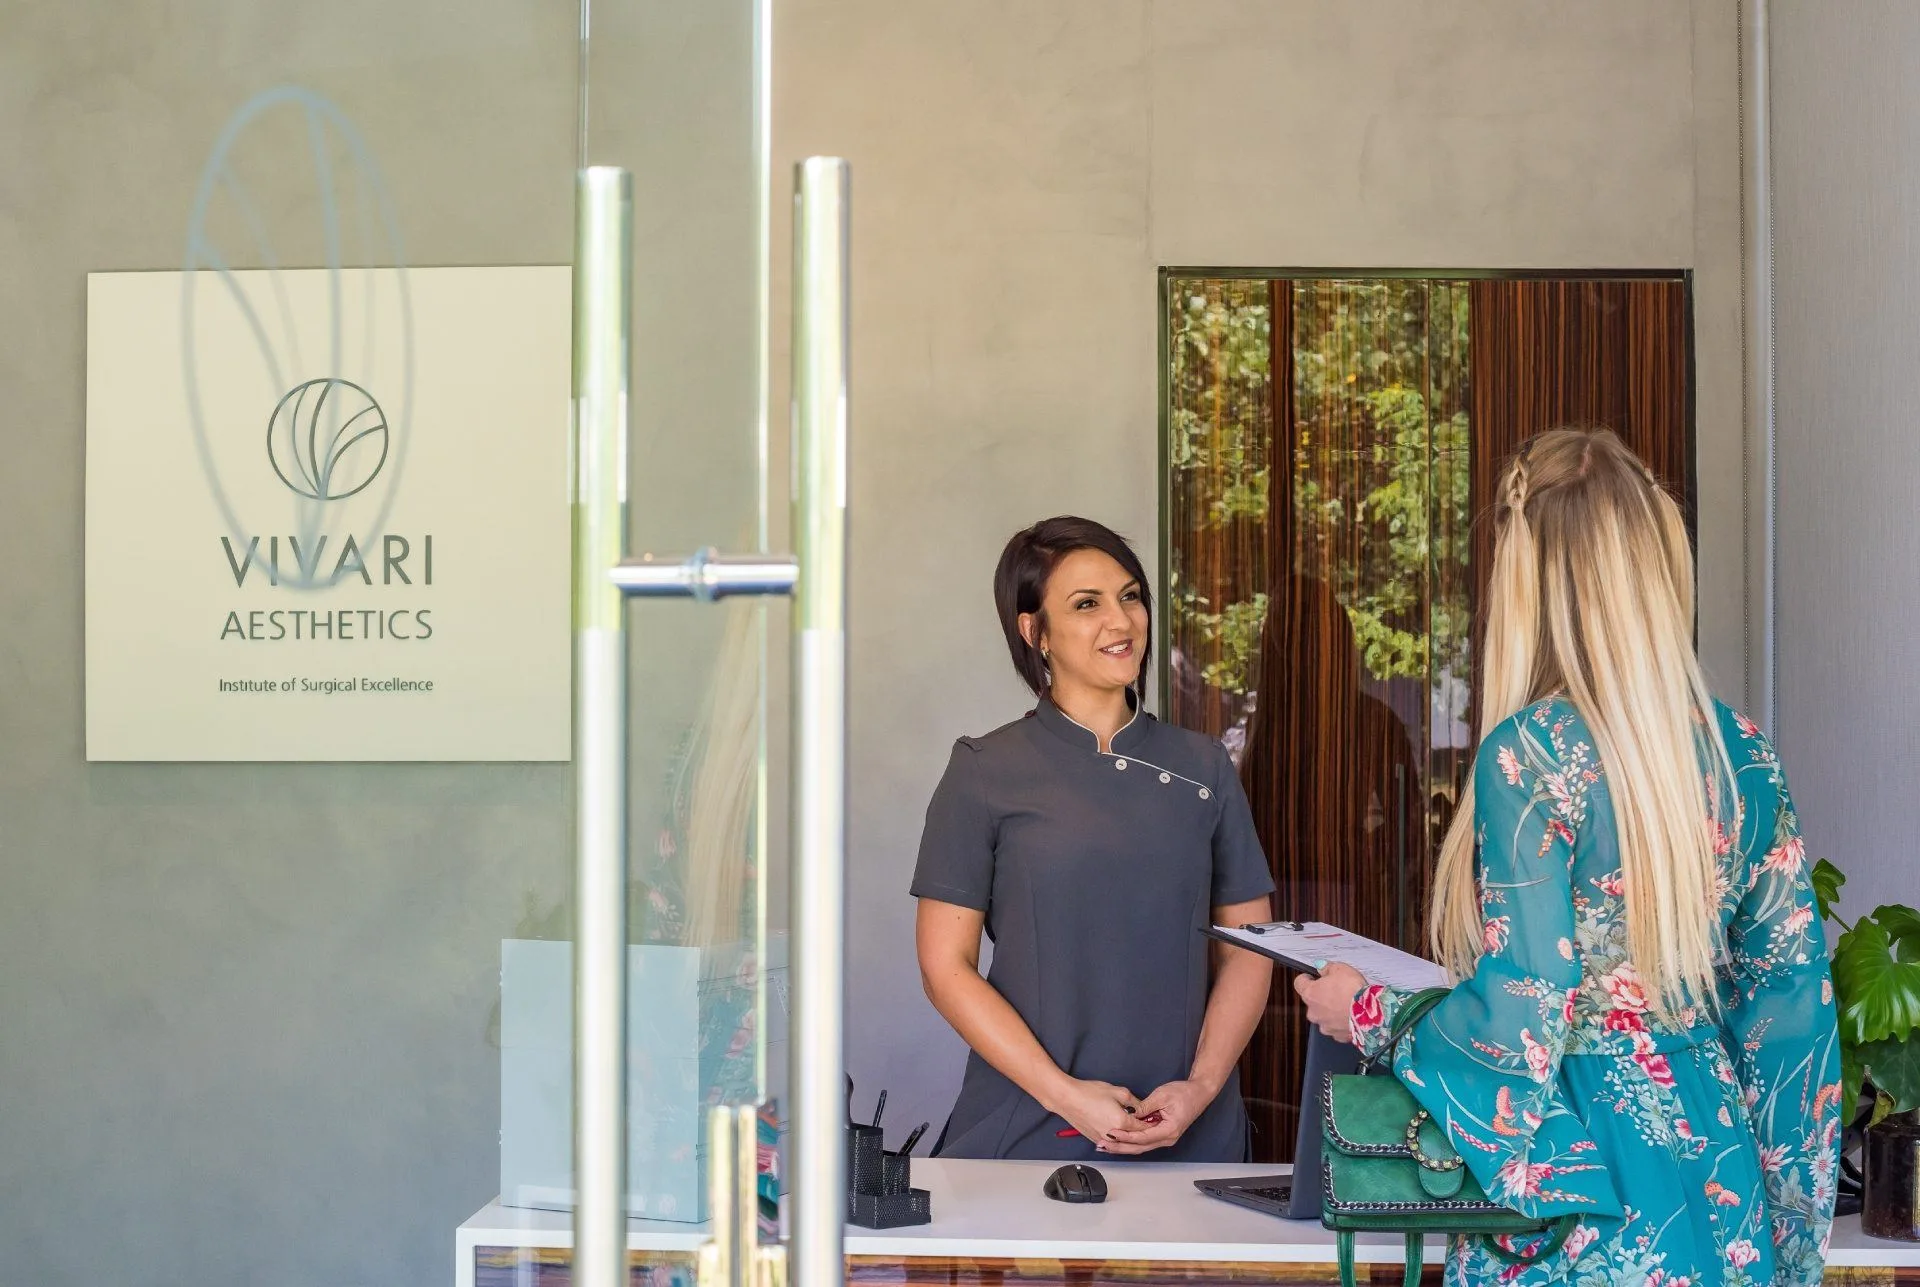 Vivari Hotel And Spa: A Medical Tourism First For Africa